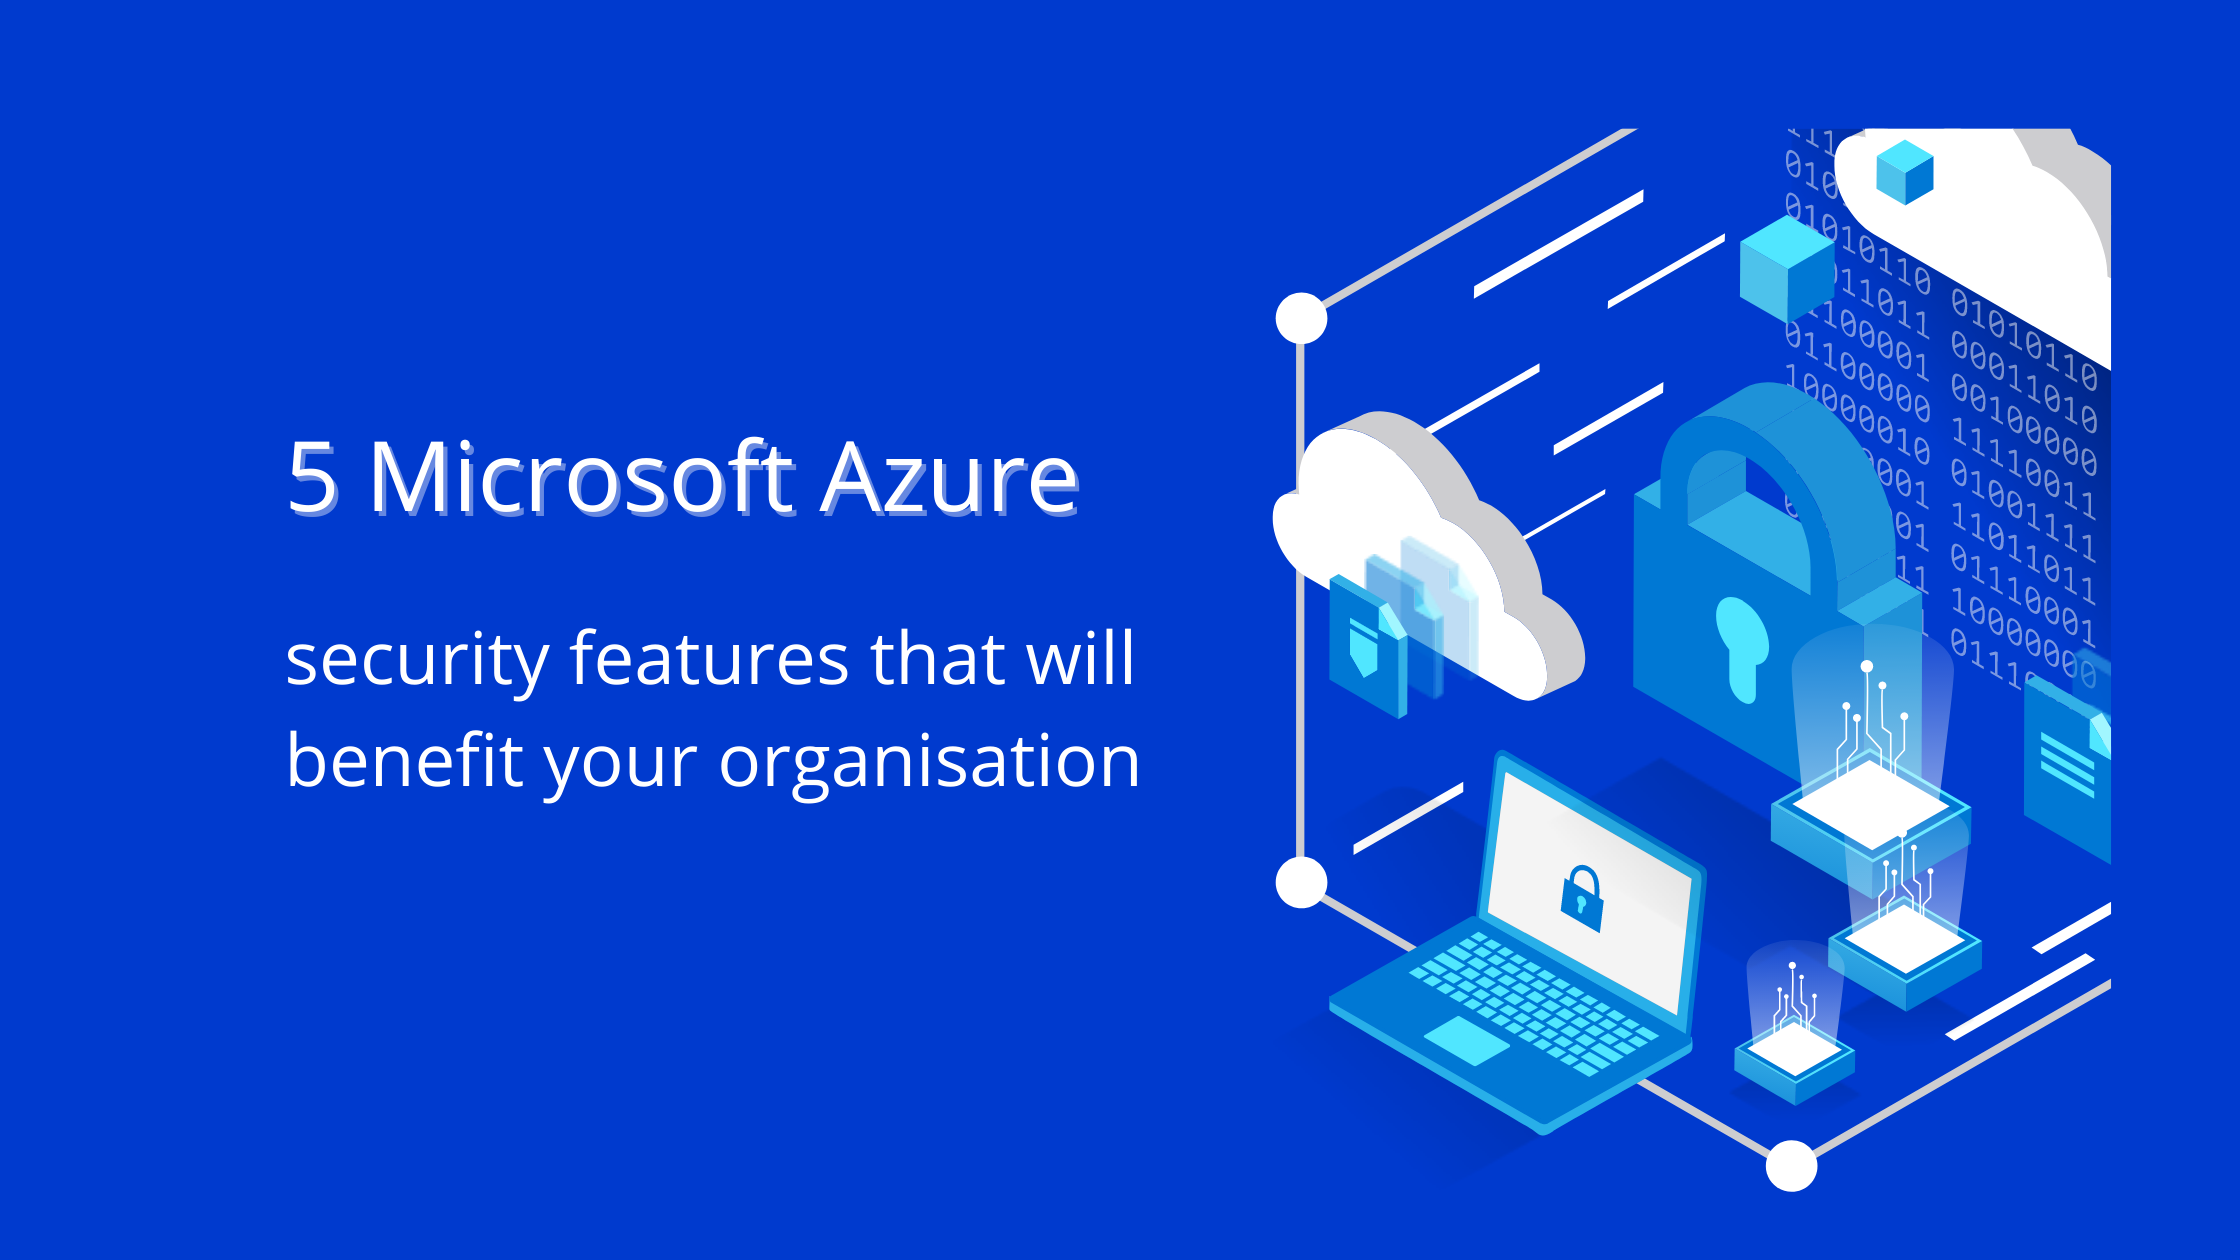 5 Microsoft Azure security features that can benefit your organisation